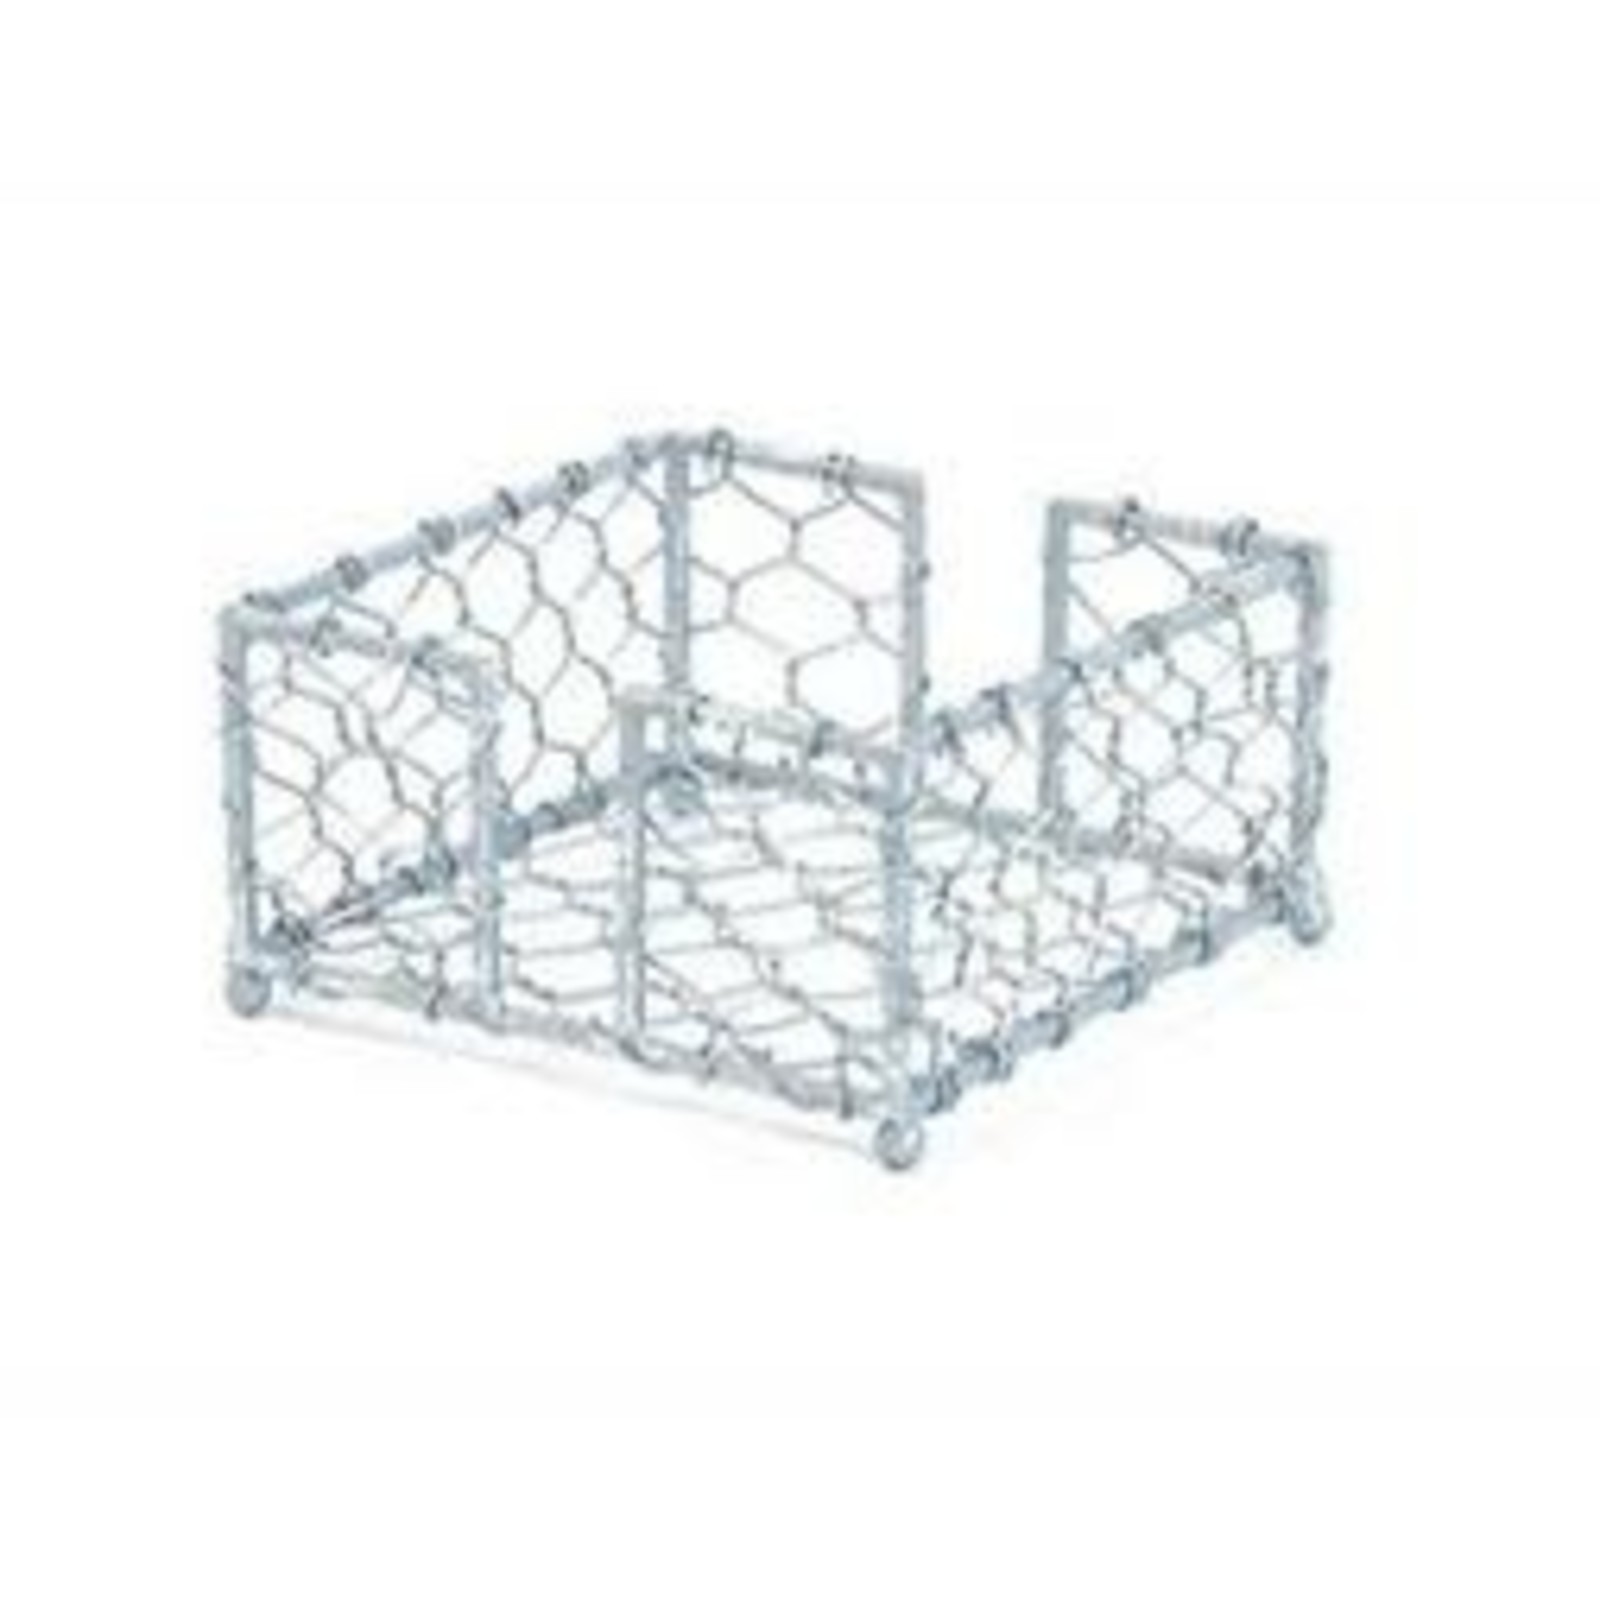 Boston International Chicken Wire/Cocktail Silver Foil Caddy loading=